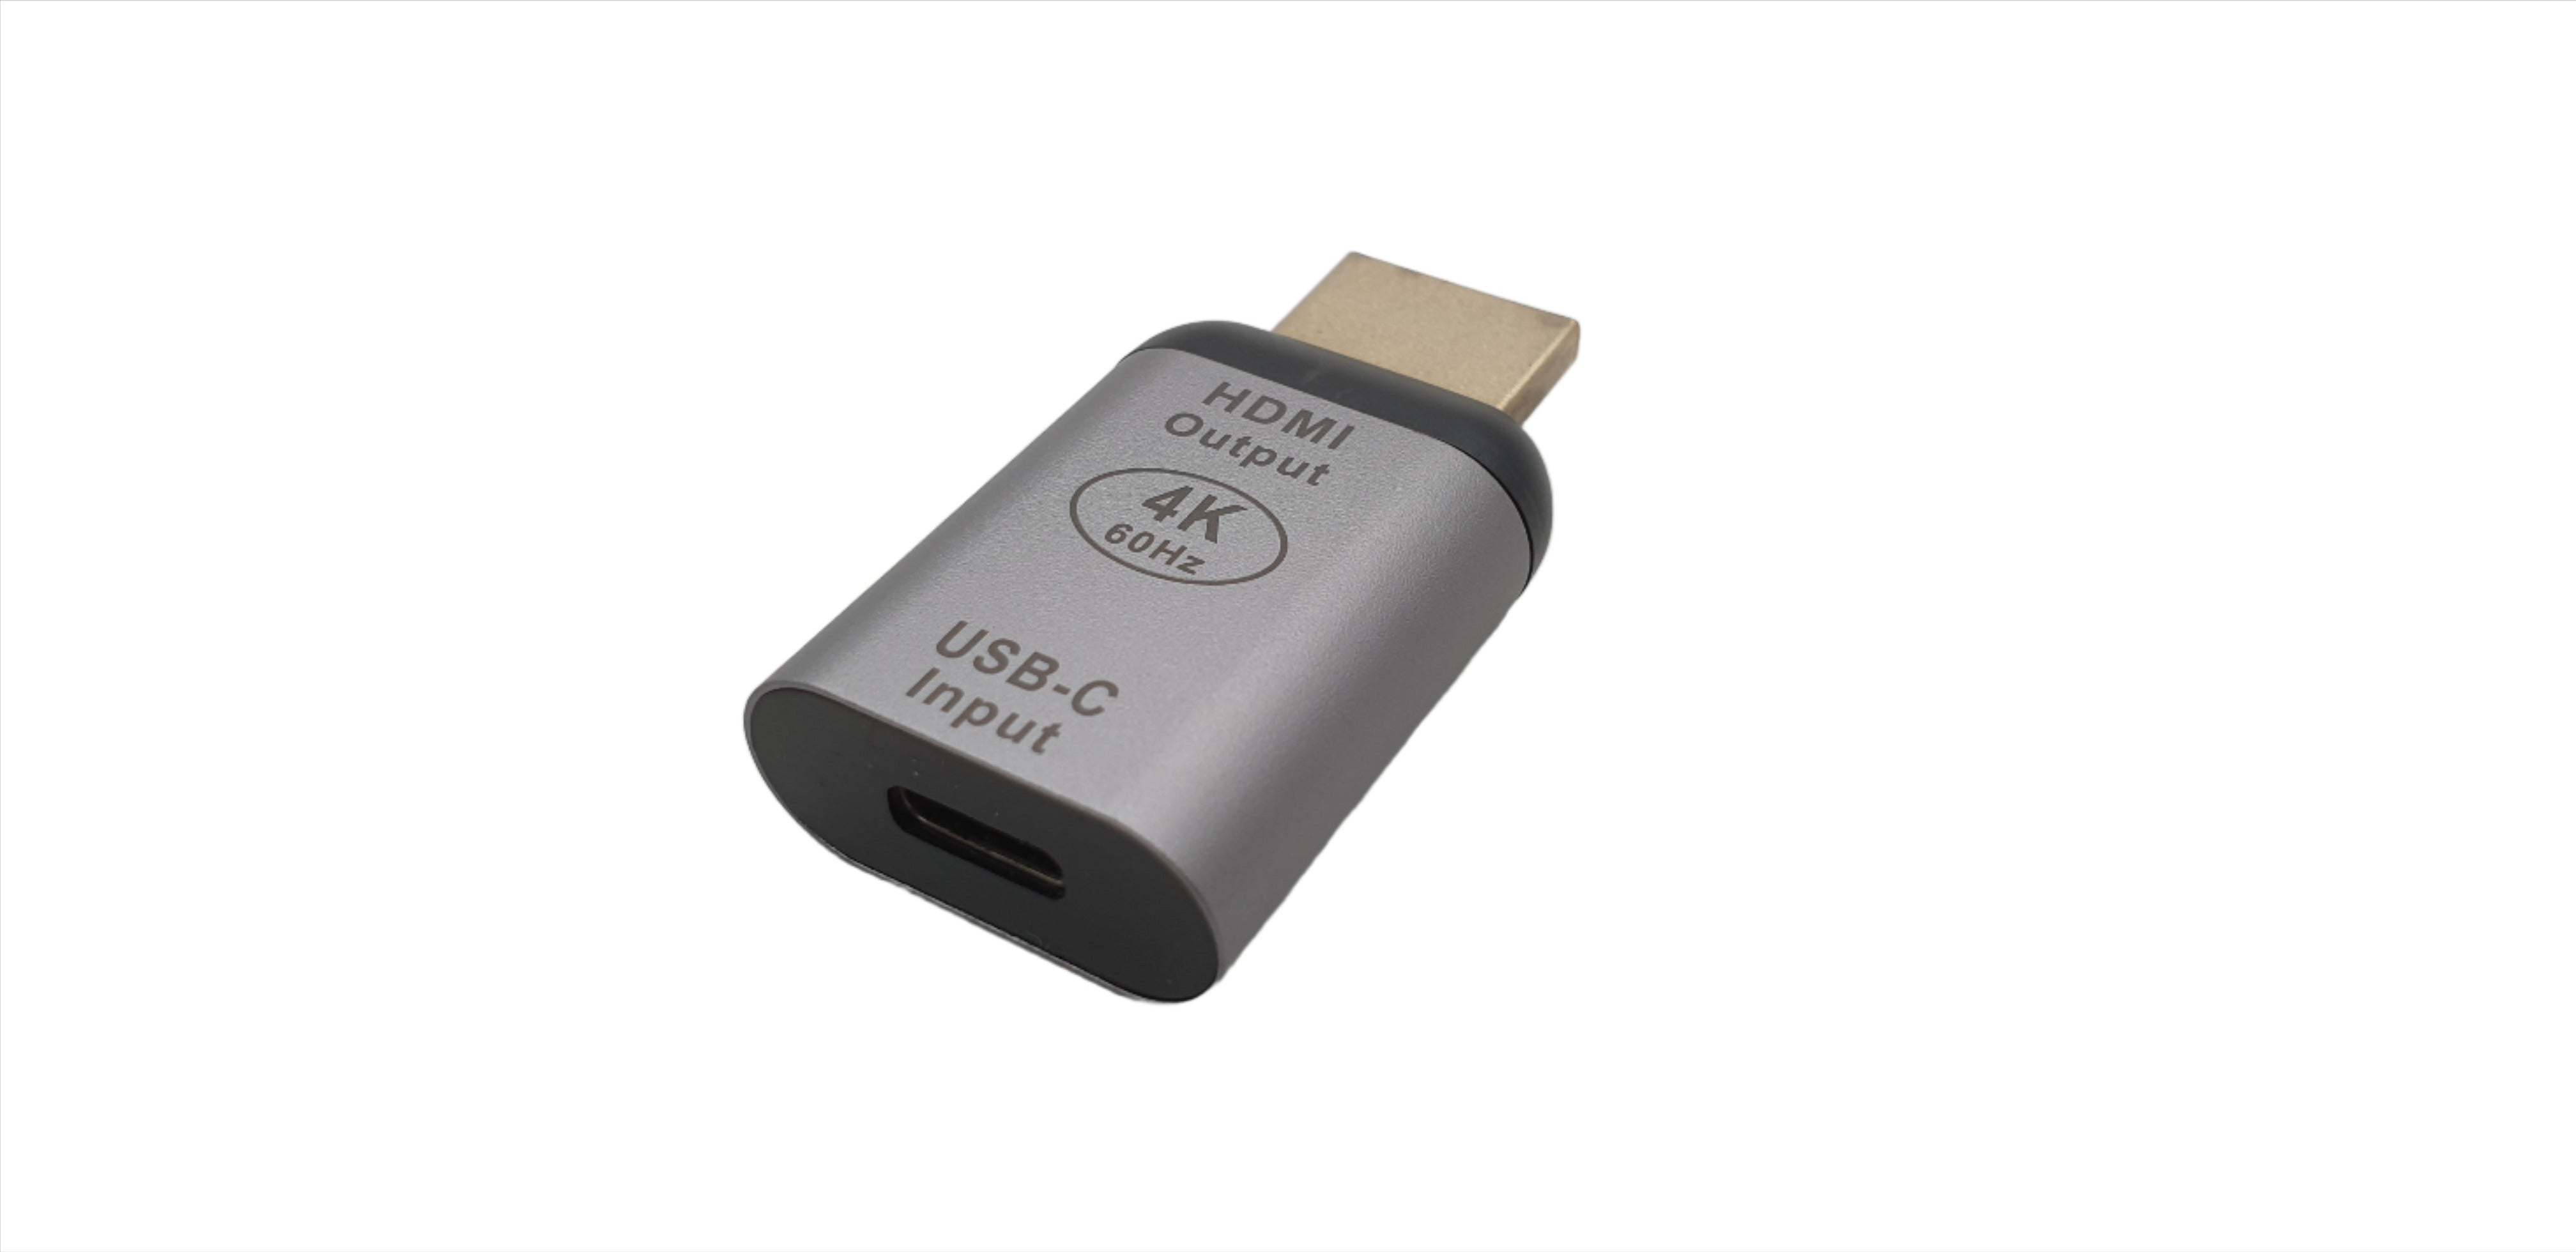 USB Type C 3.1 Gen2 to HDMI2.0 adapter